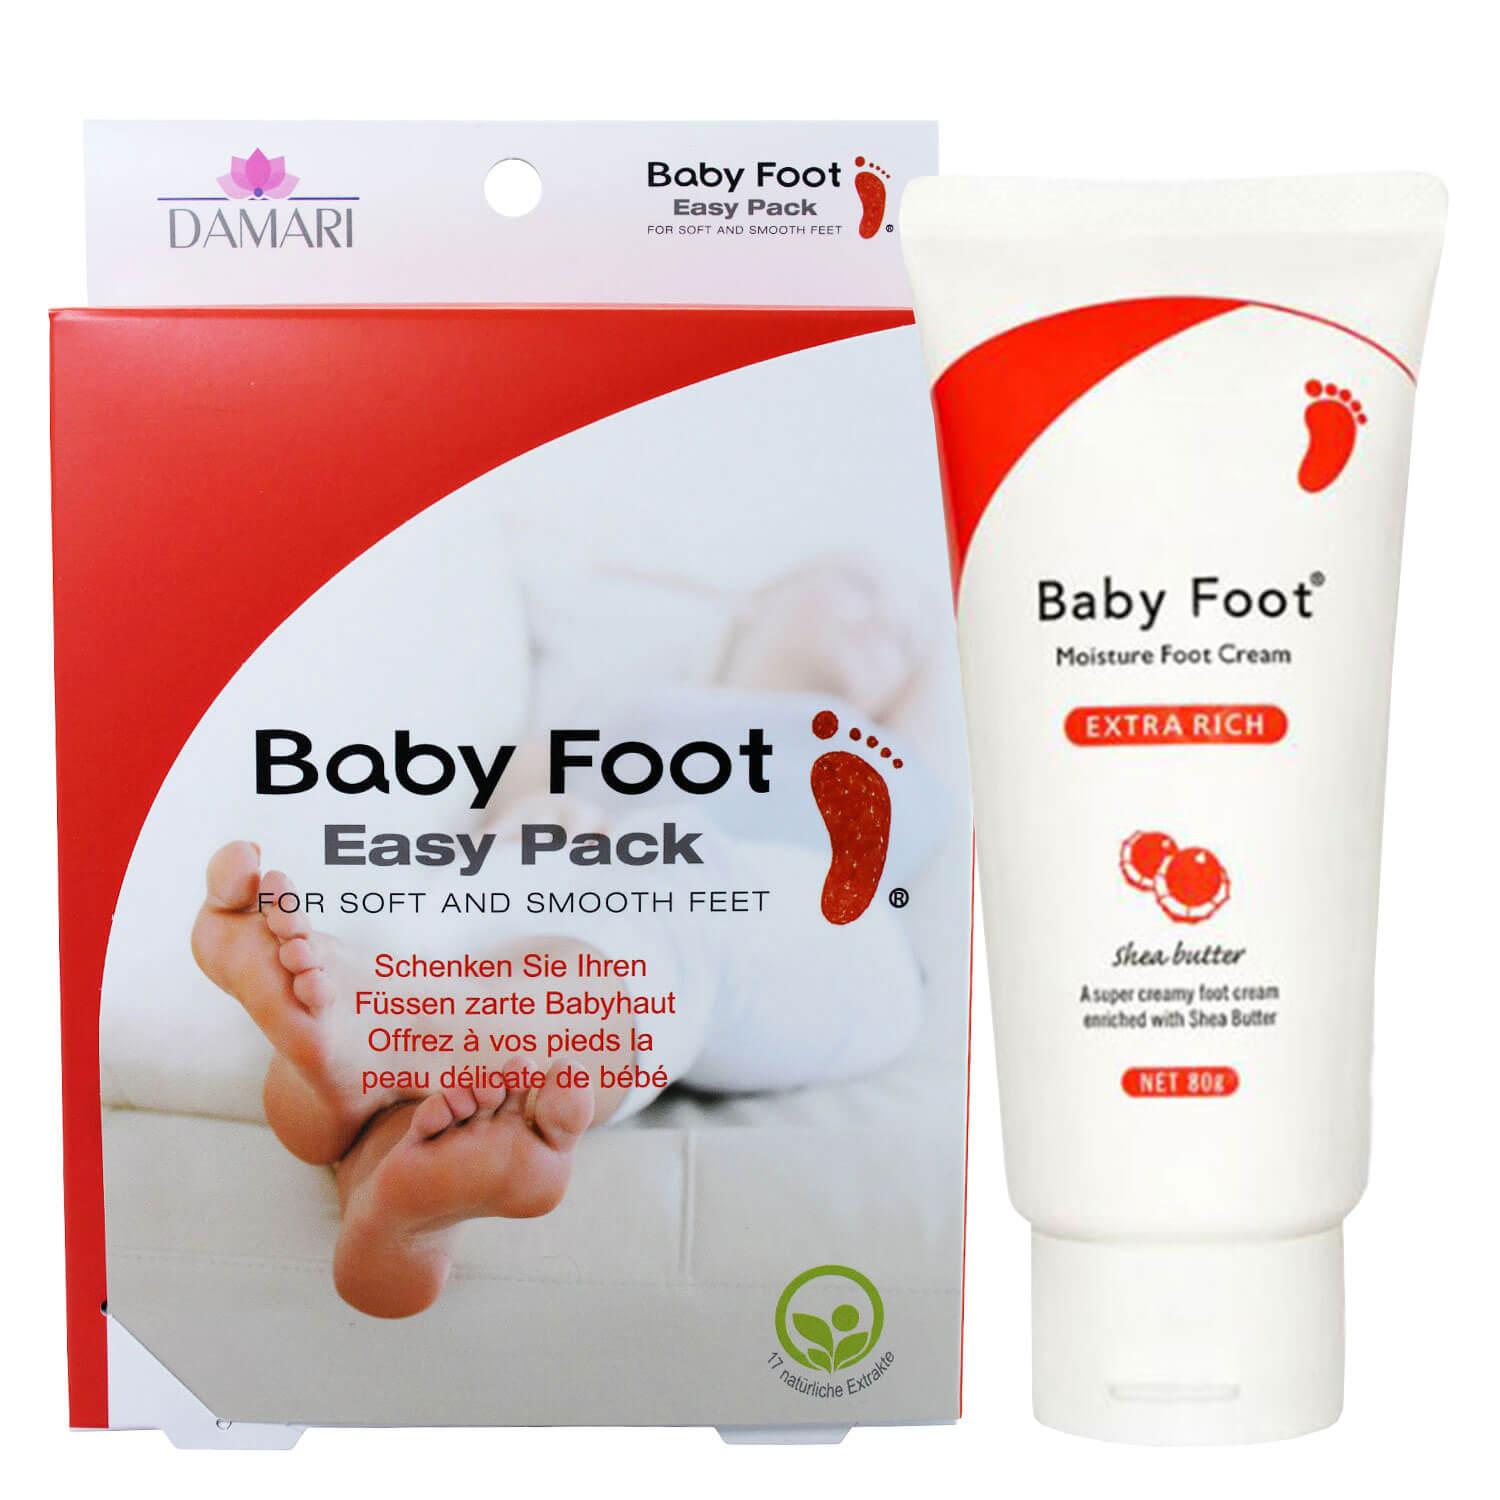 Baby Foot - Easy Pack & Extra Rich Cream Set